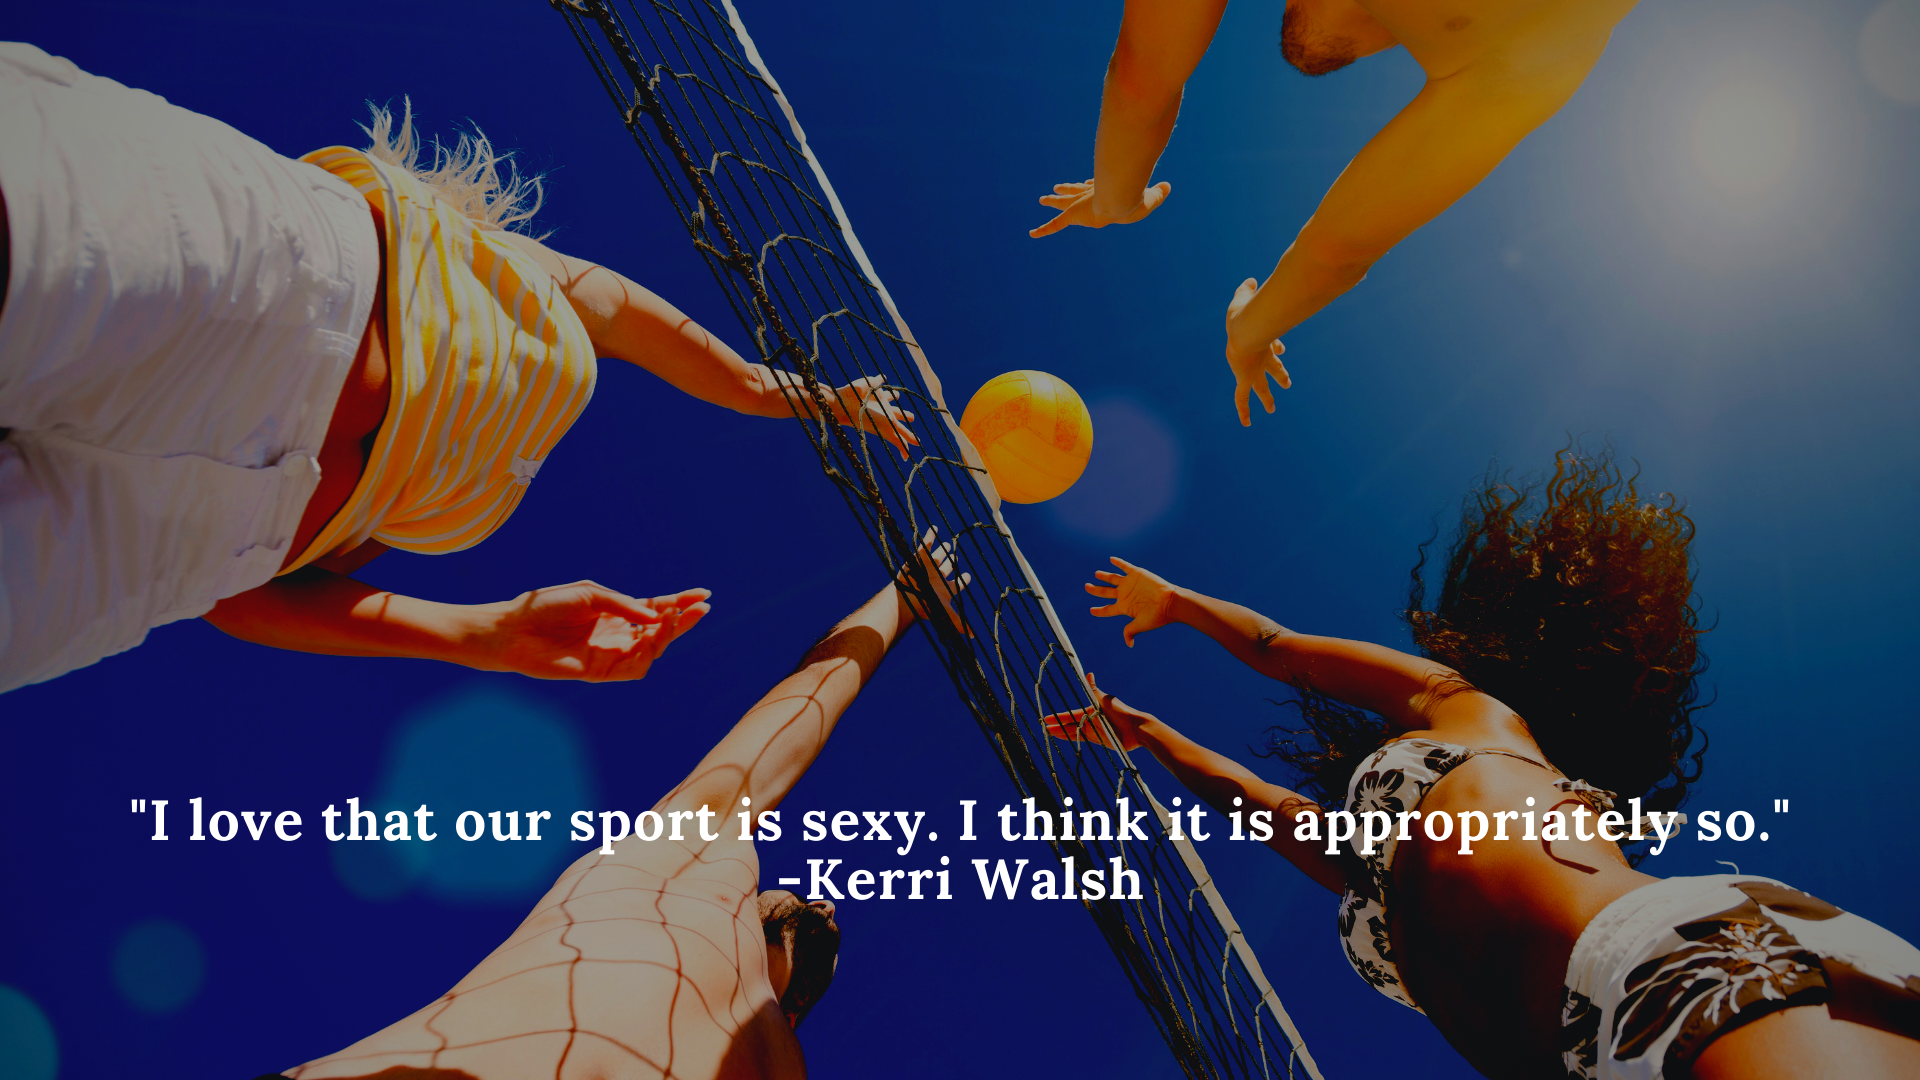 Best Inspirational Volleyball Quotes & Sayings | Quotes for Volleyball